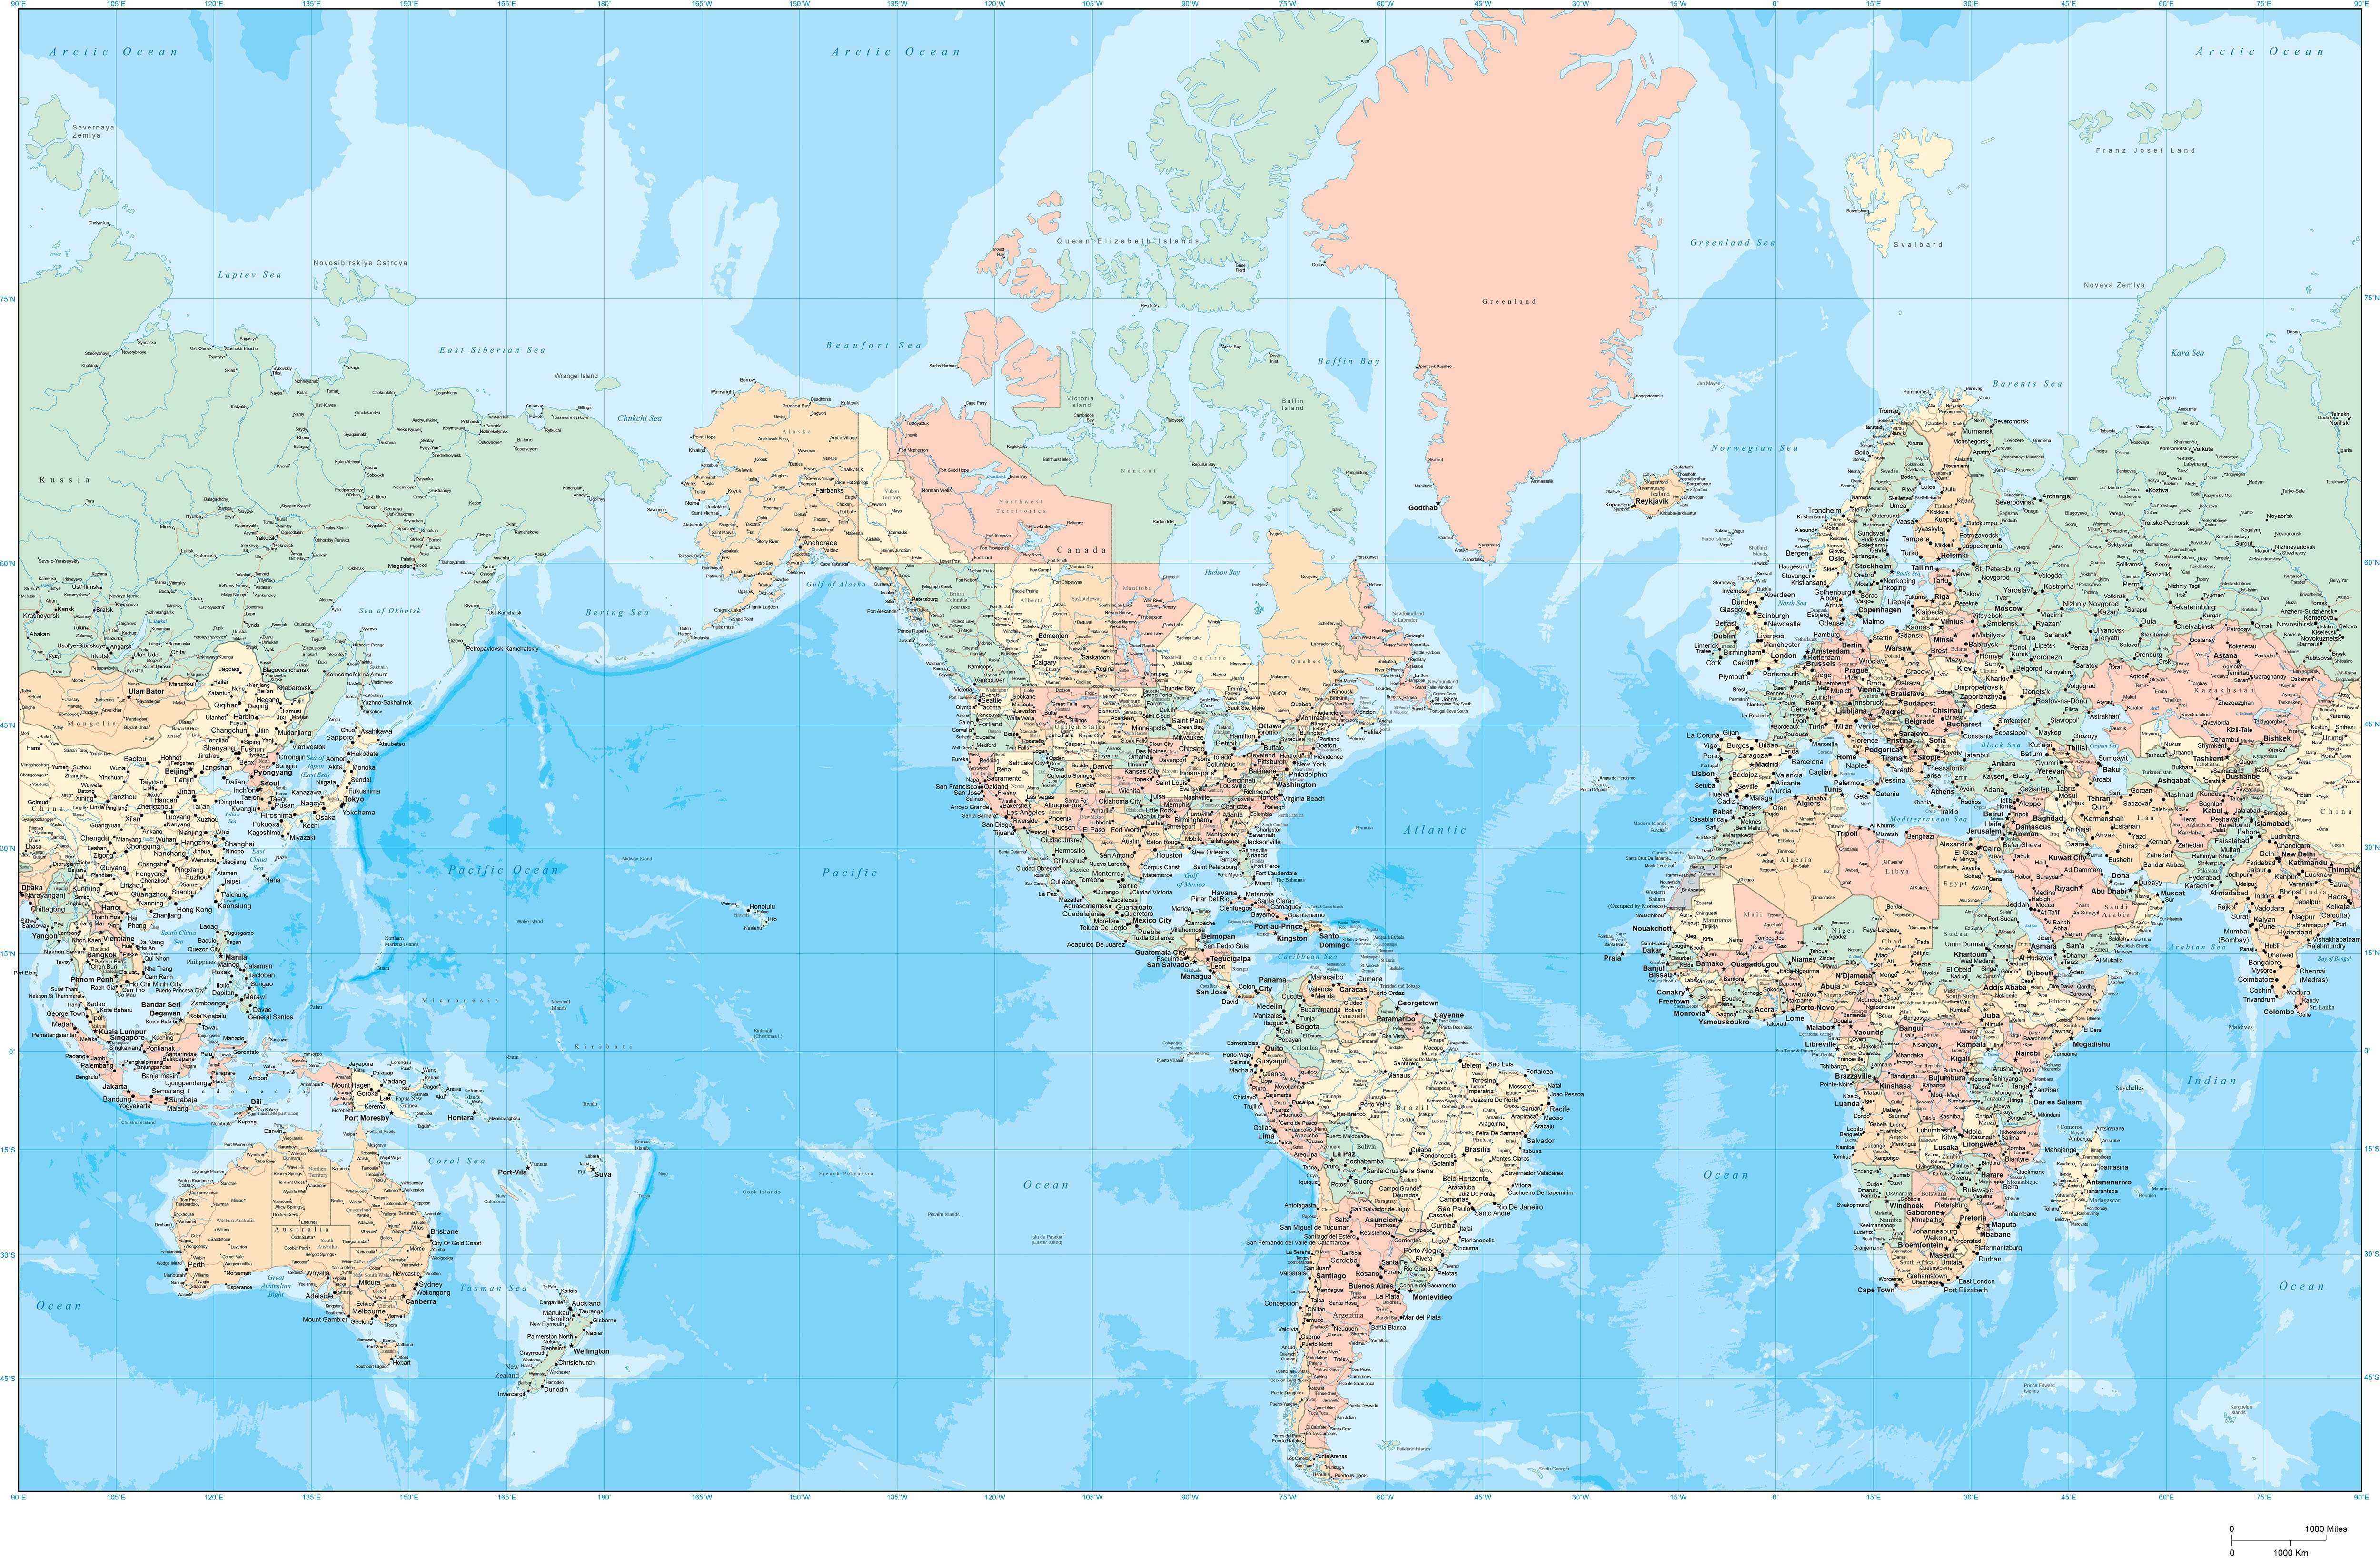 Large Size Detailed Adobe Illustrator World Map With Ocean Contours